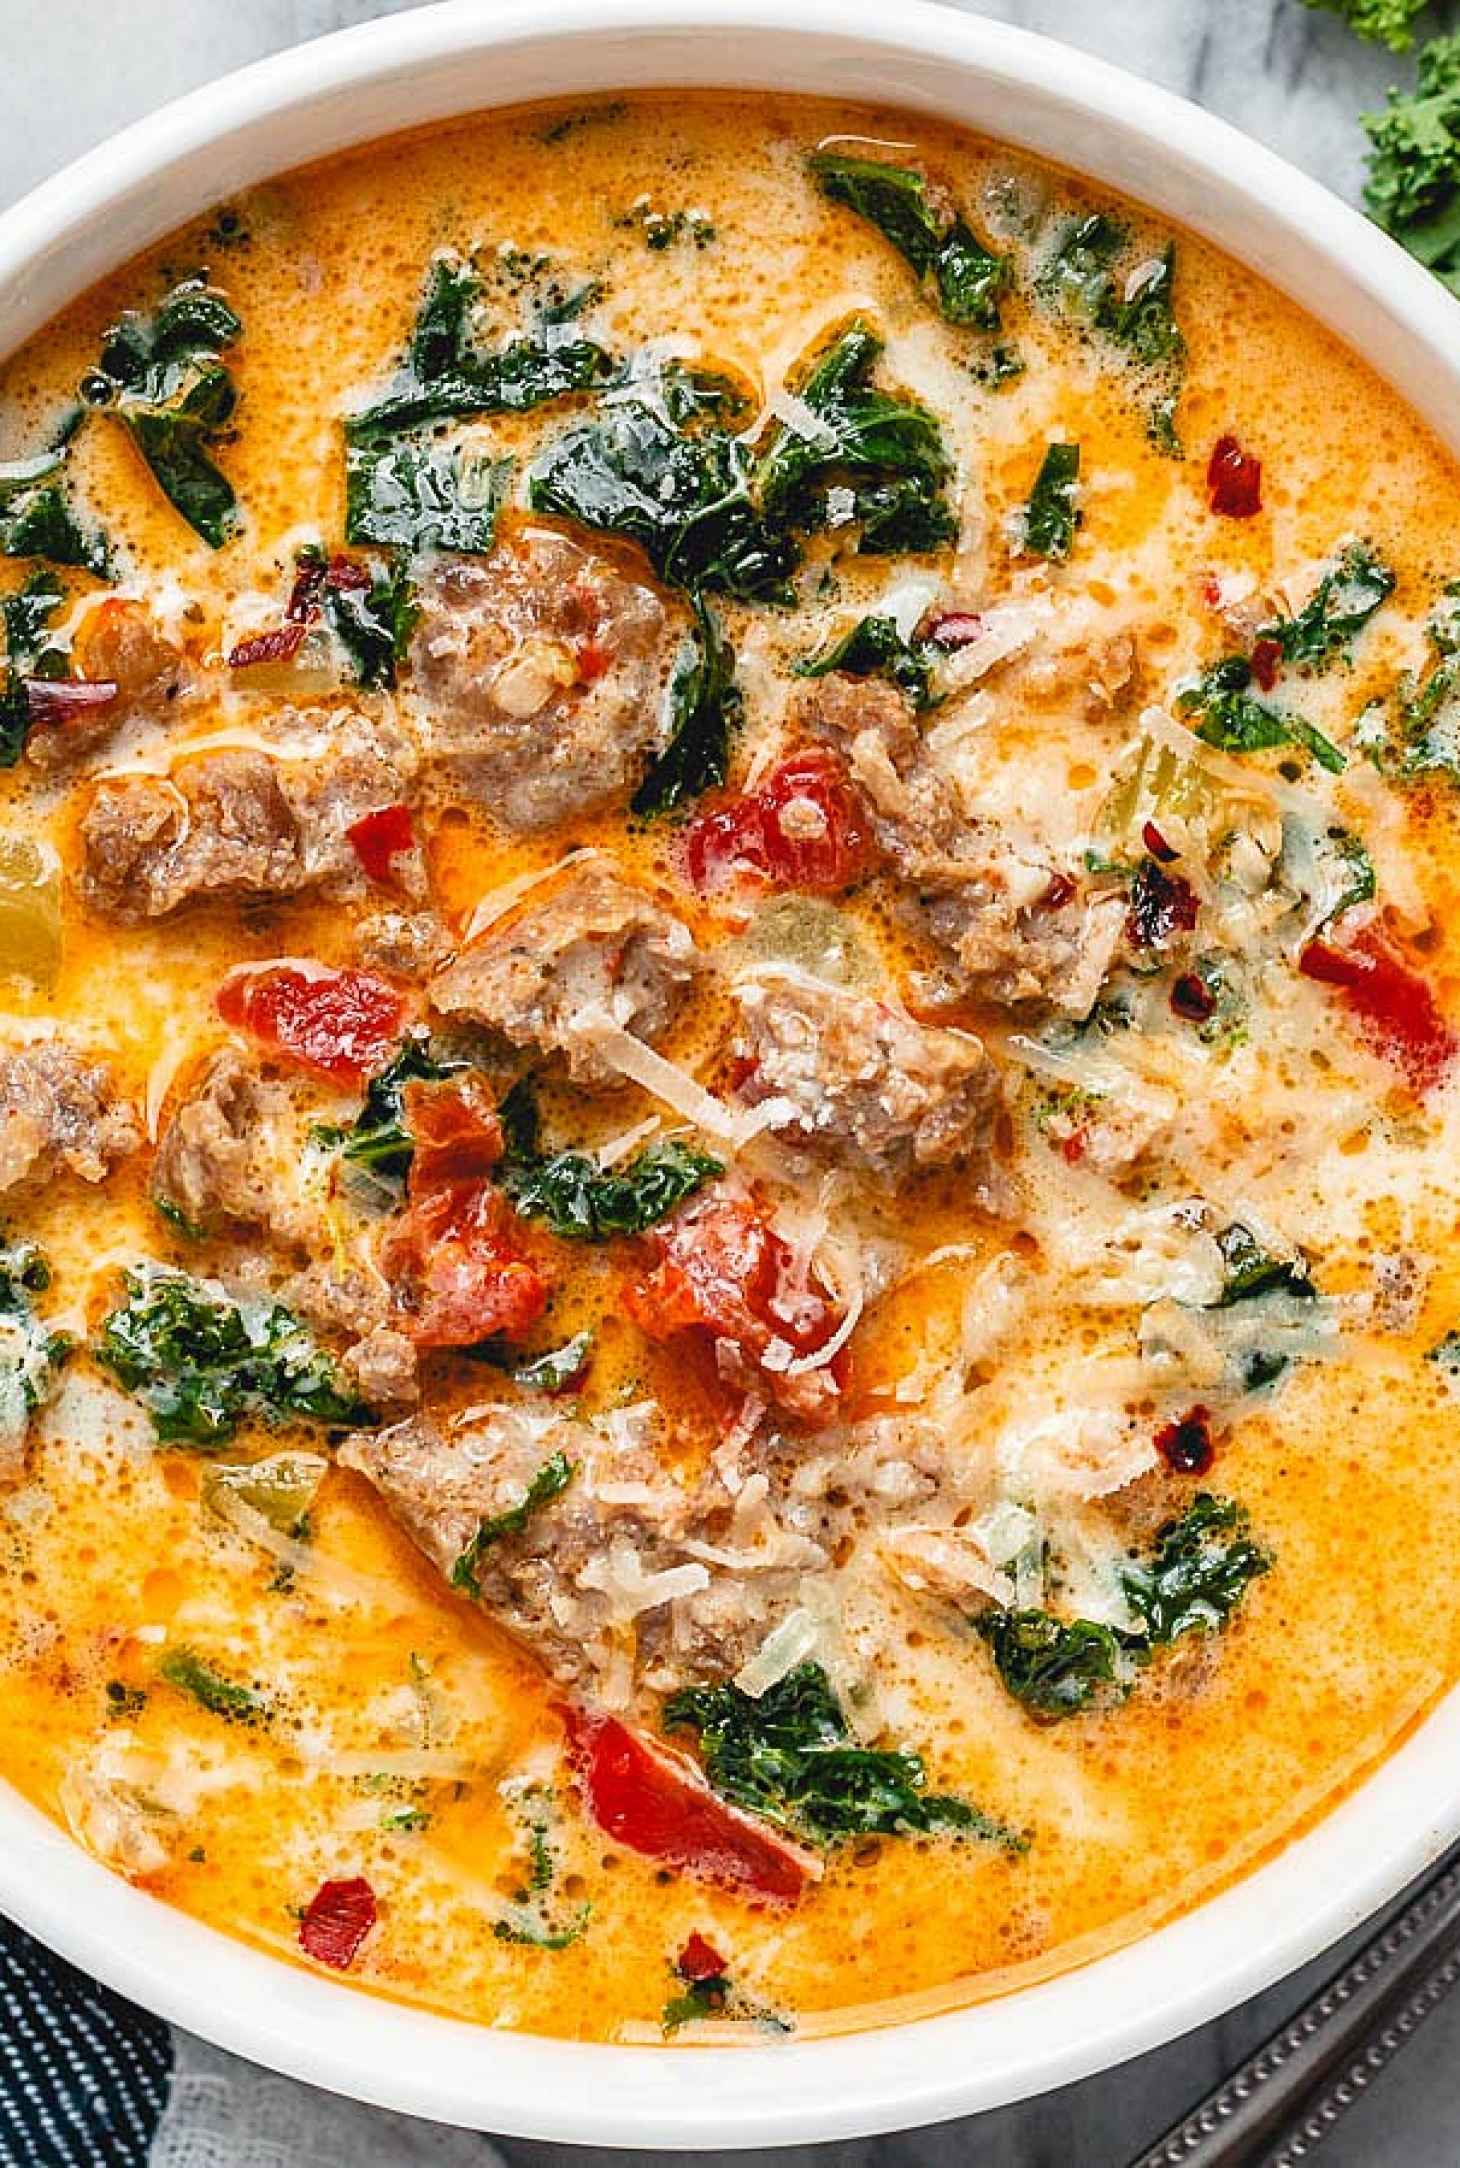 Instant Pot Keto Tuscan Soup - #recipe by #eatwell101 - https://www.eatwell101.com/instant-pot-keto-tuscan-soup-recipe